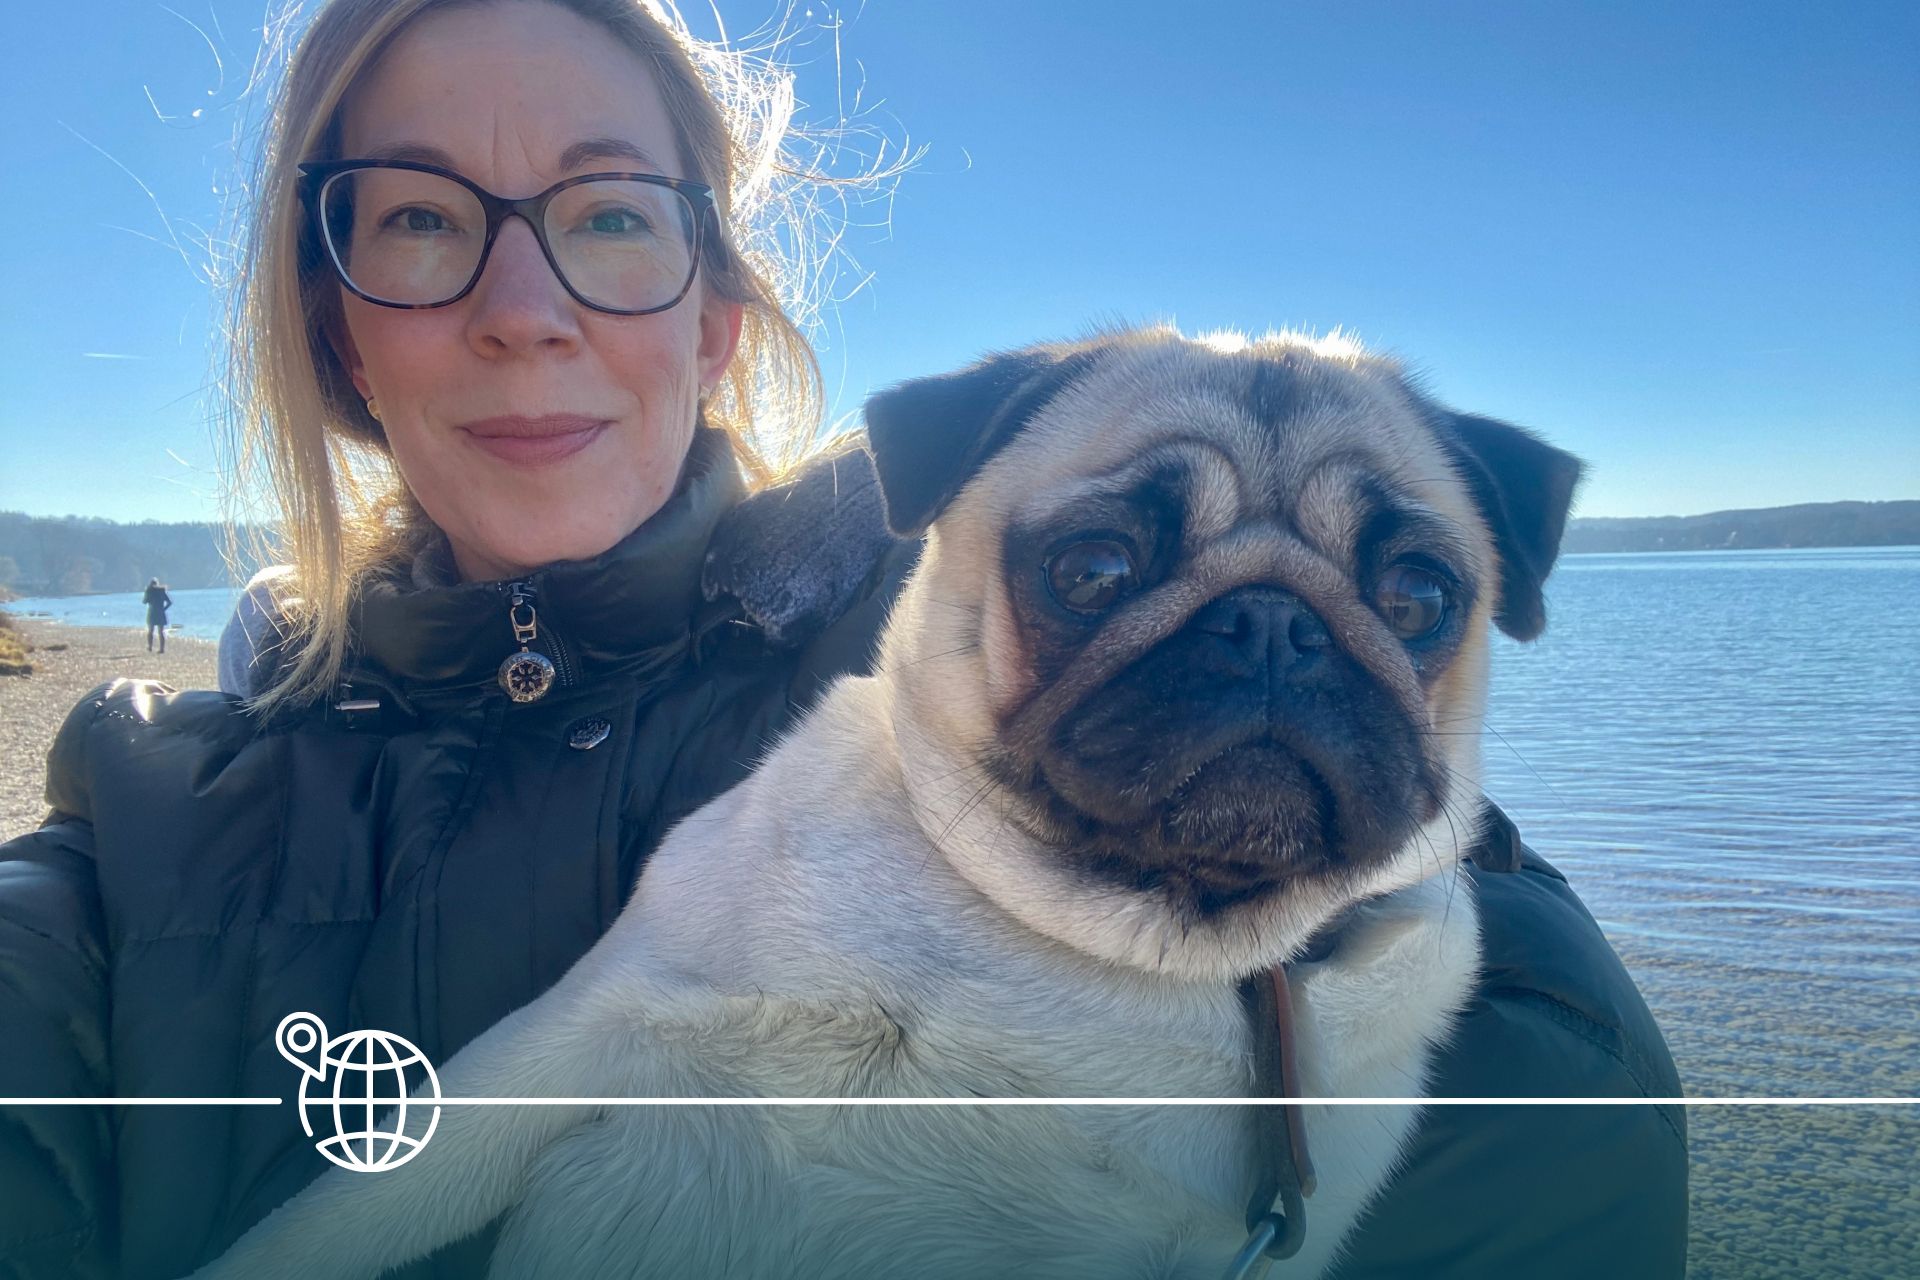 There is a lot to discover on a trip to Lake Starnberg, about 25 kilometres southwest of Munich - for example, on the approximately 49-kilometre circular walk around the lake. Very often with me: Svea, my cheeky pug.